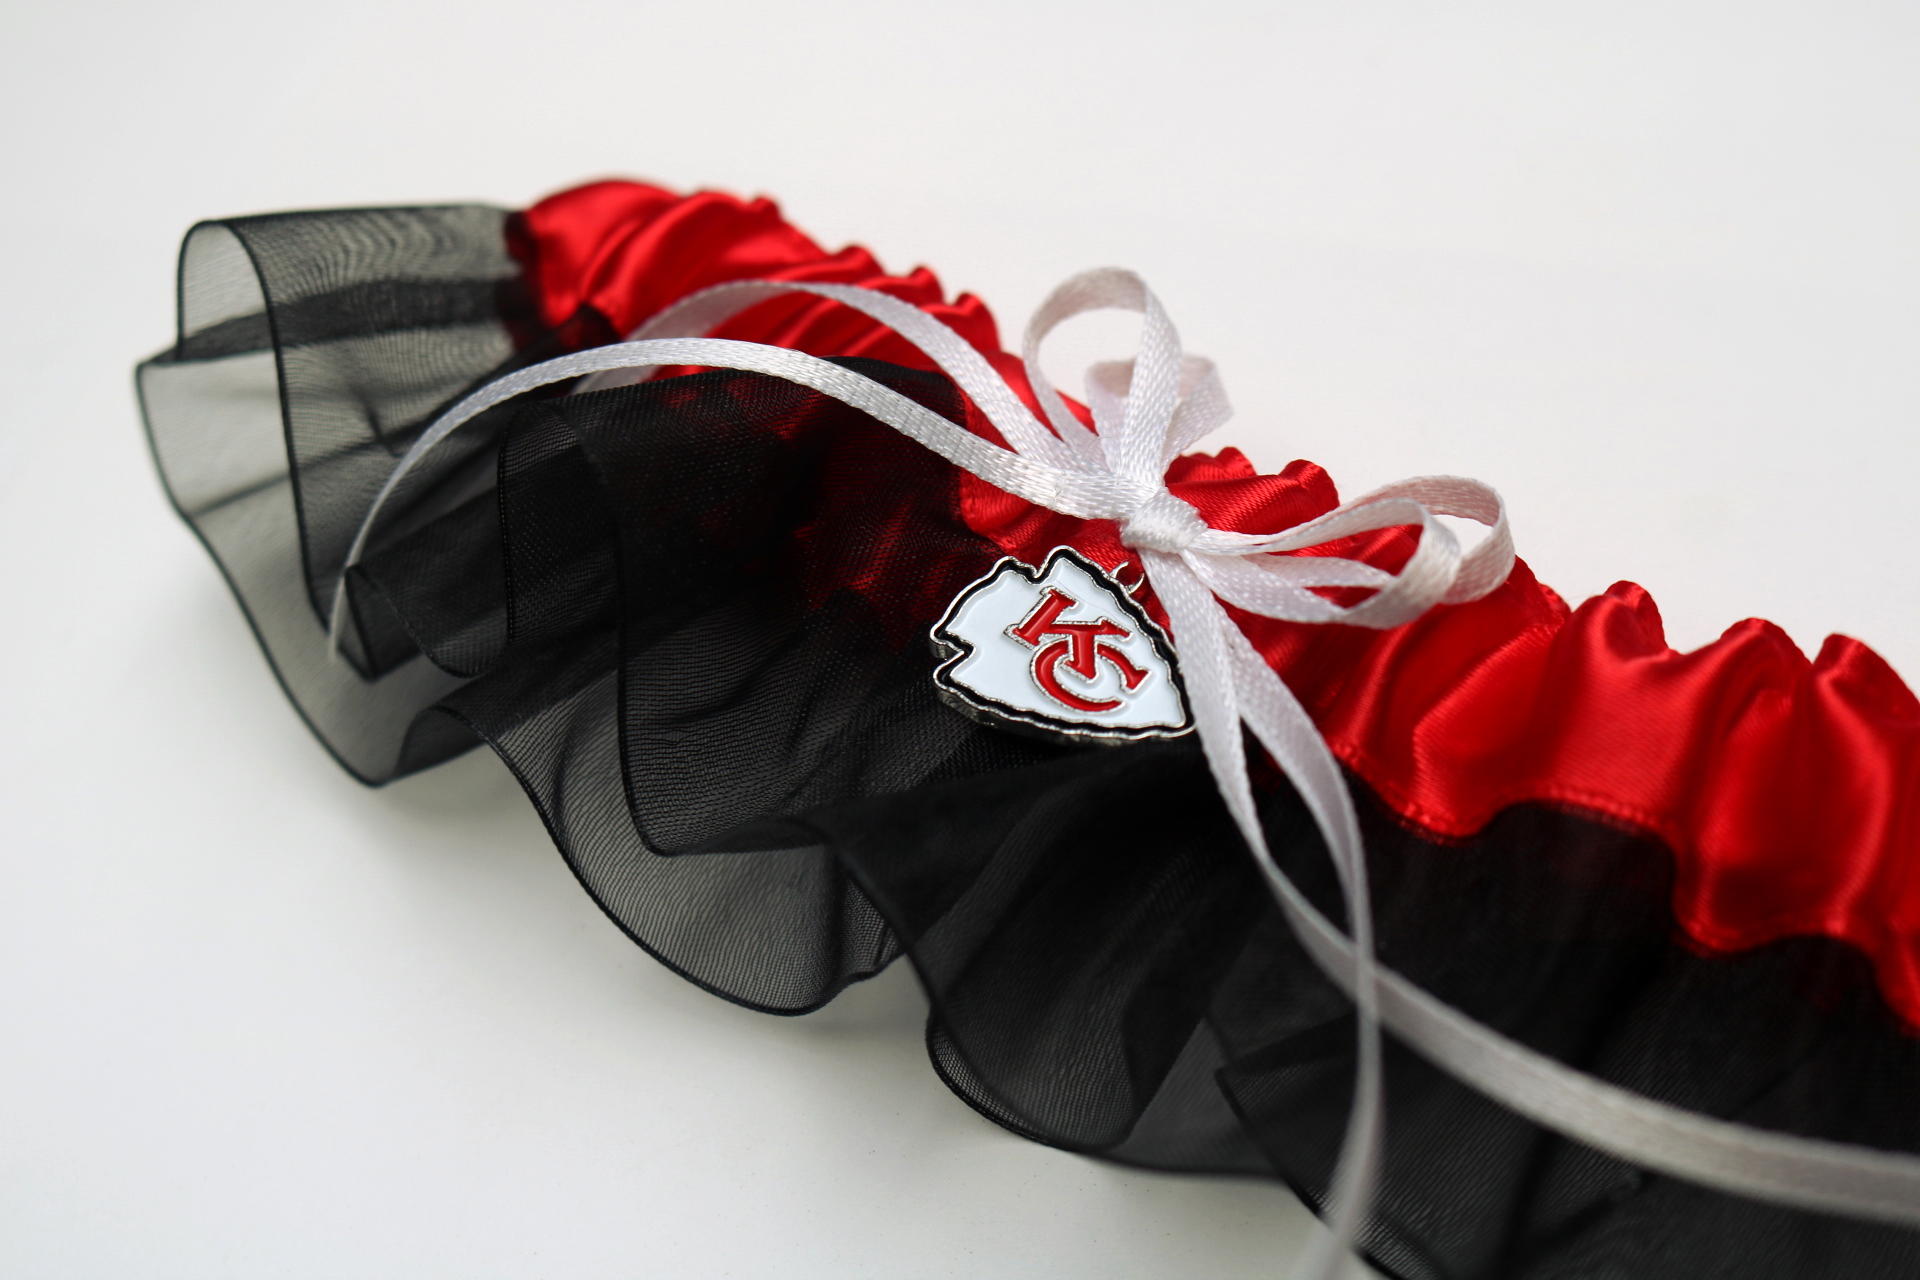 Kansas City Chiefs Inspired Garter with Licensed Charm